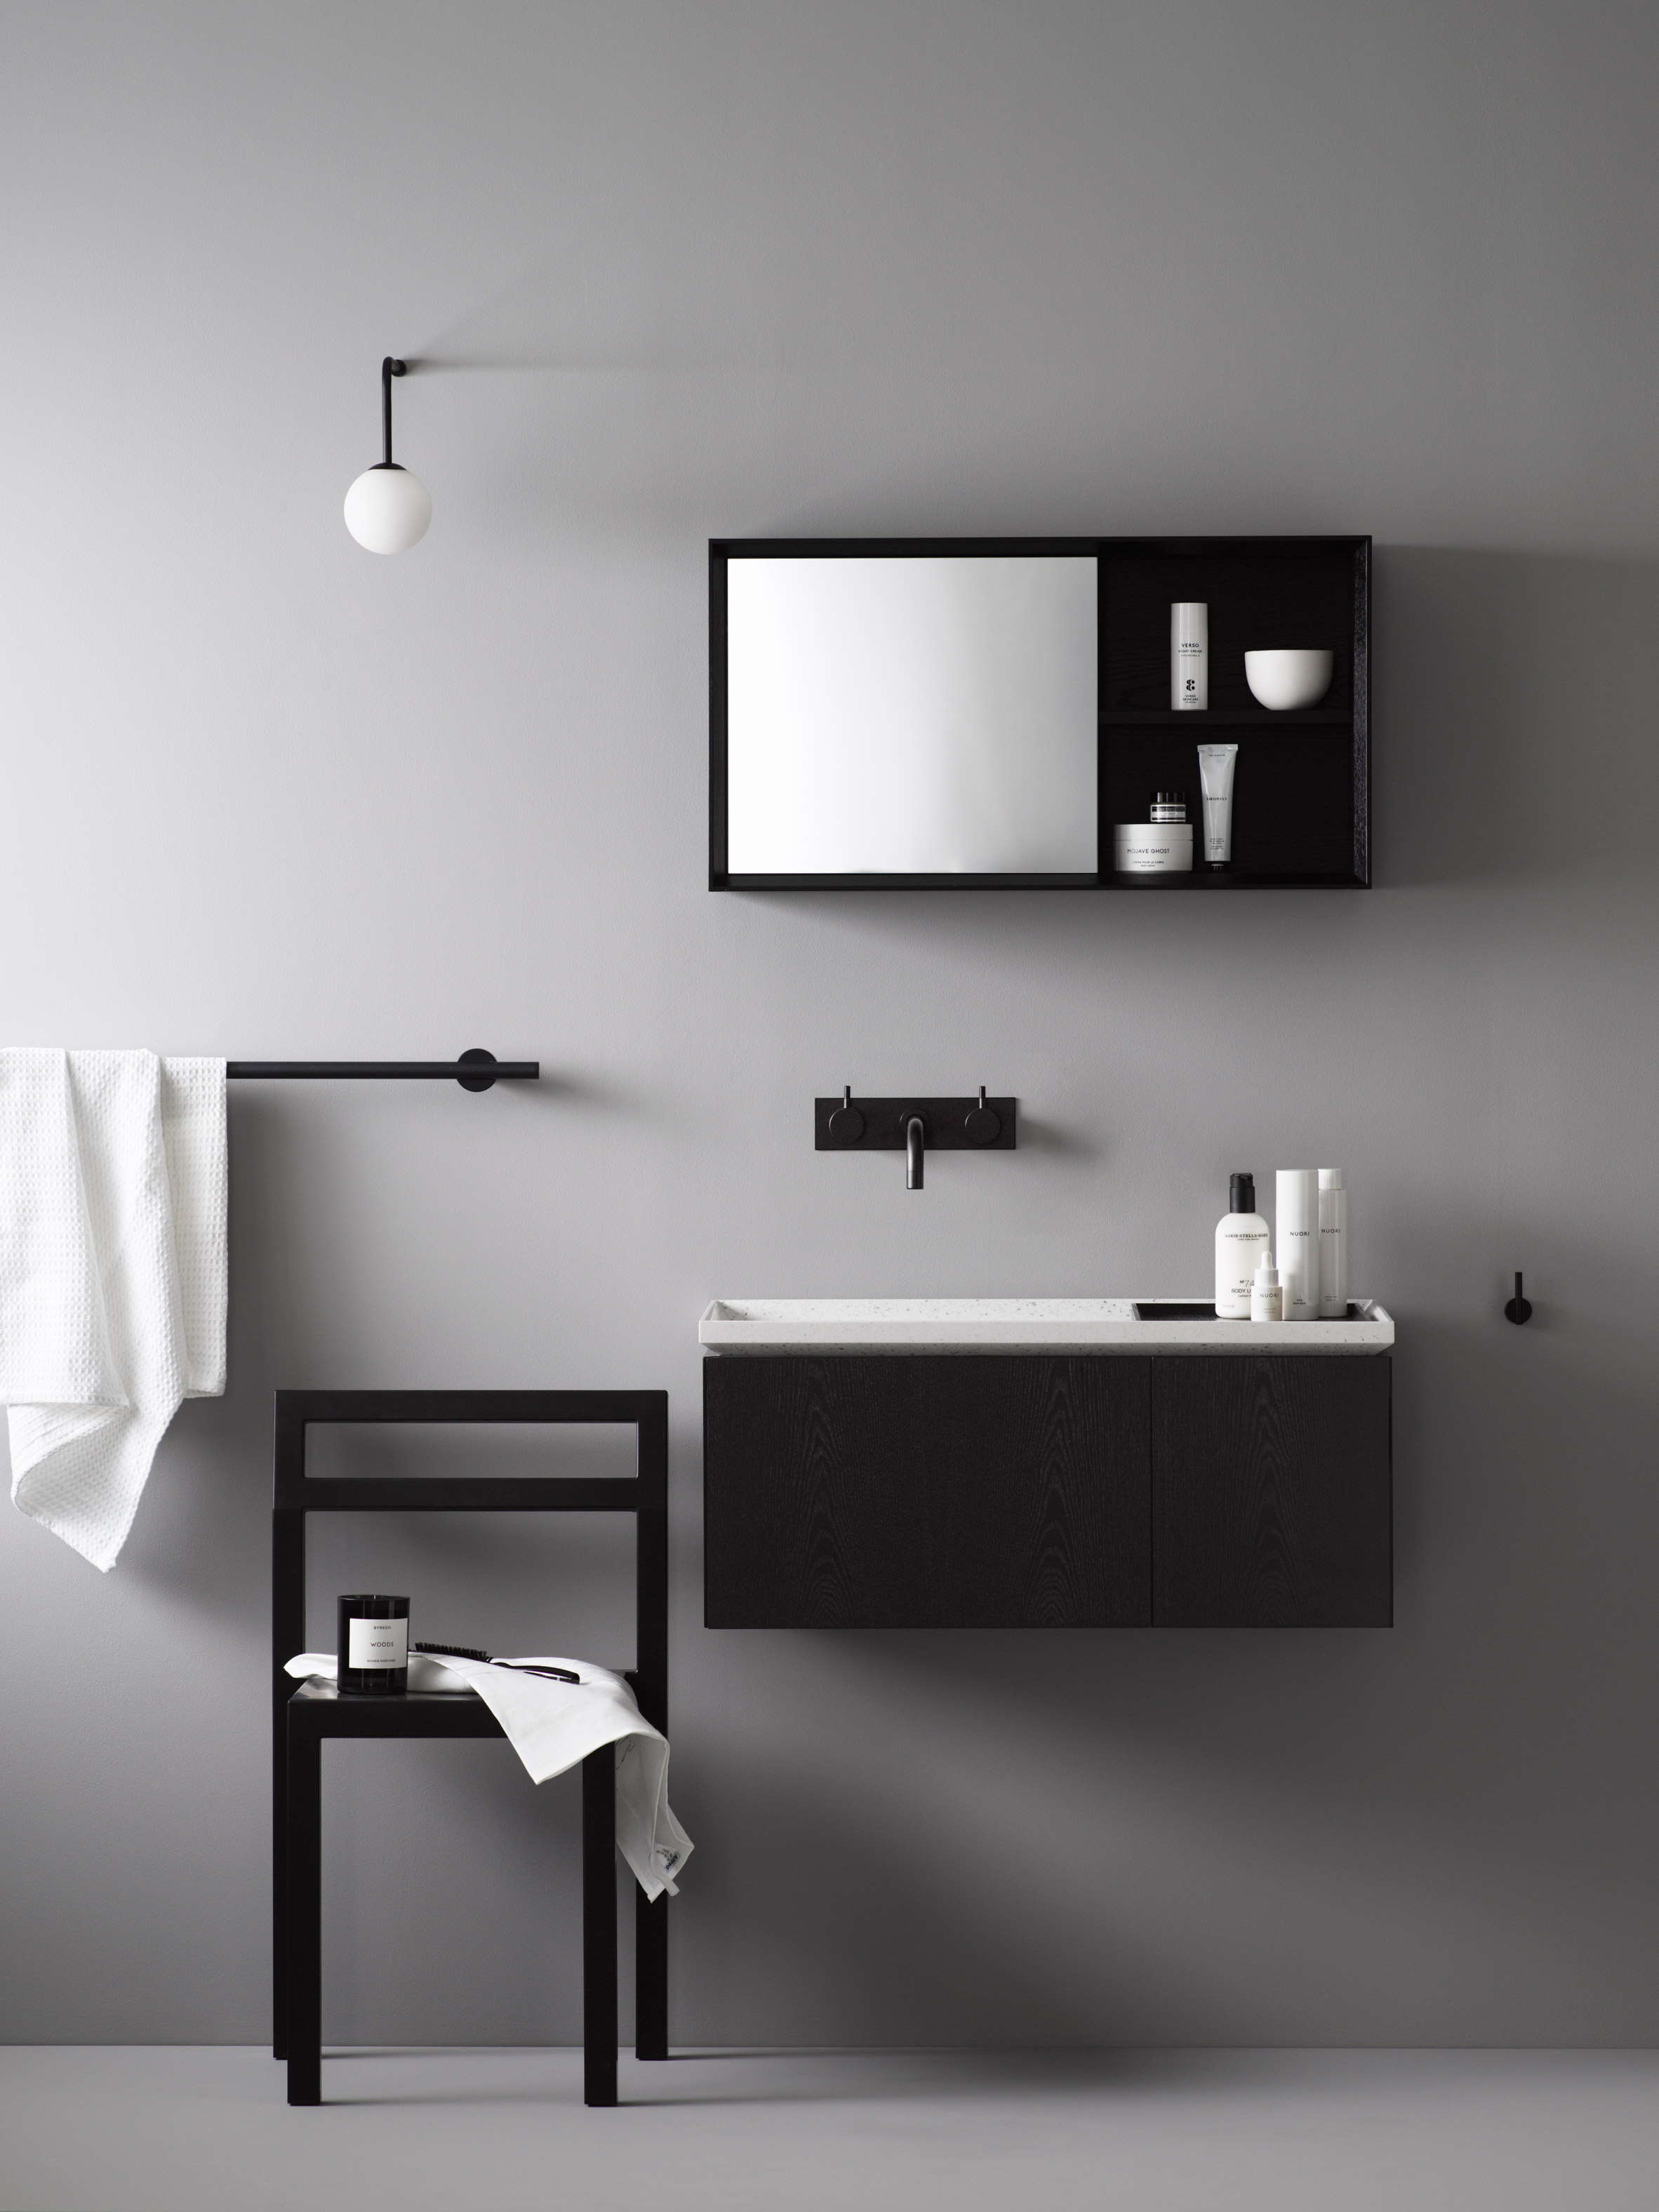 Norm Architects create bathroom collection for small-space living